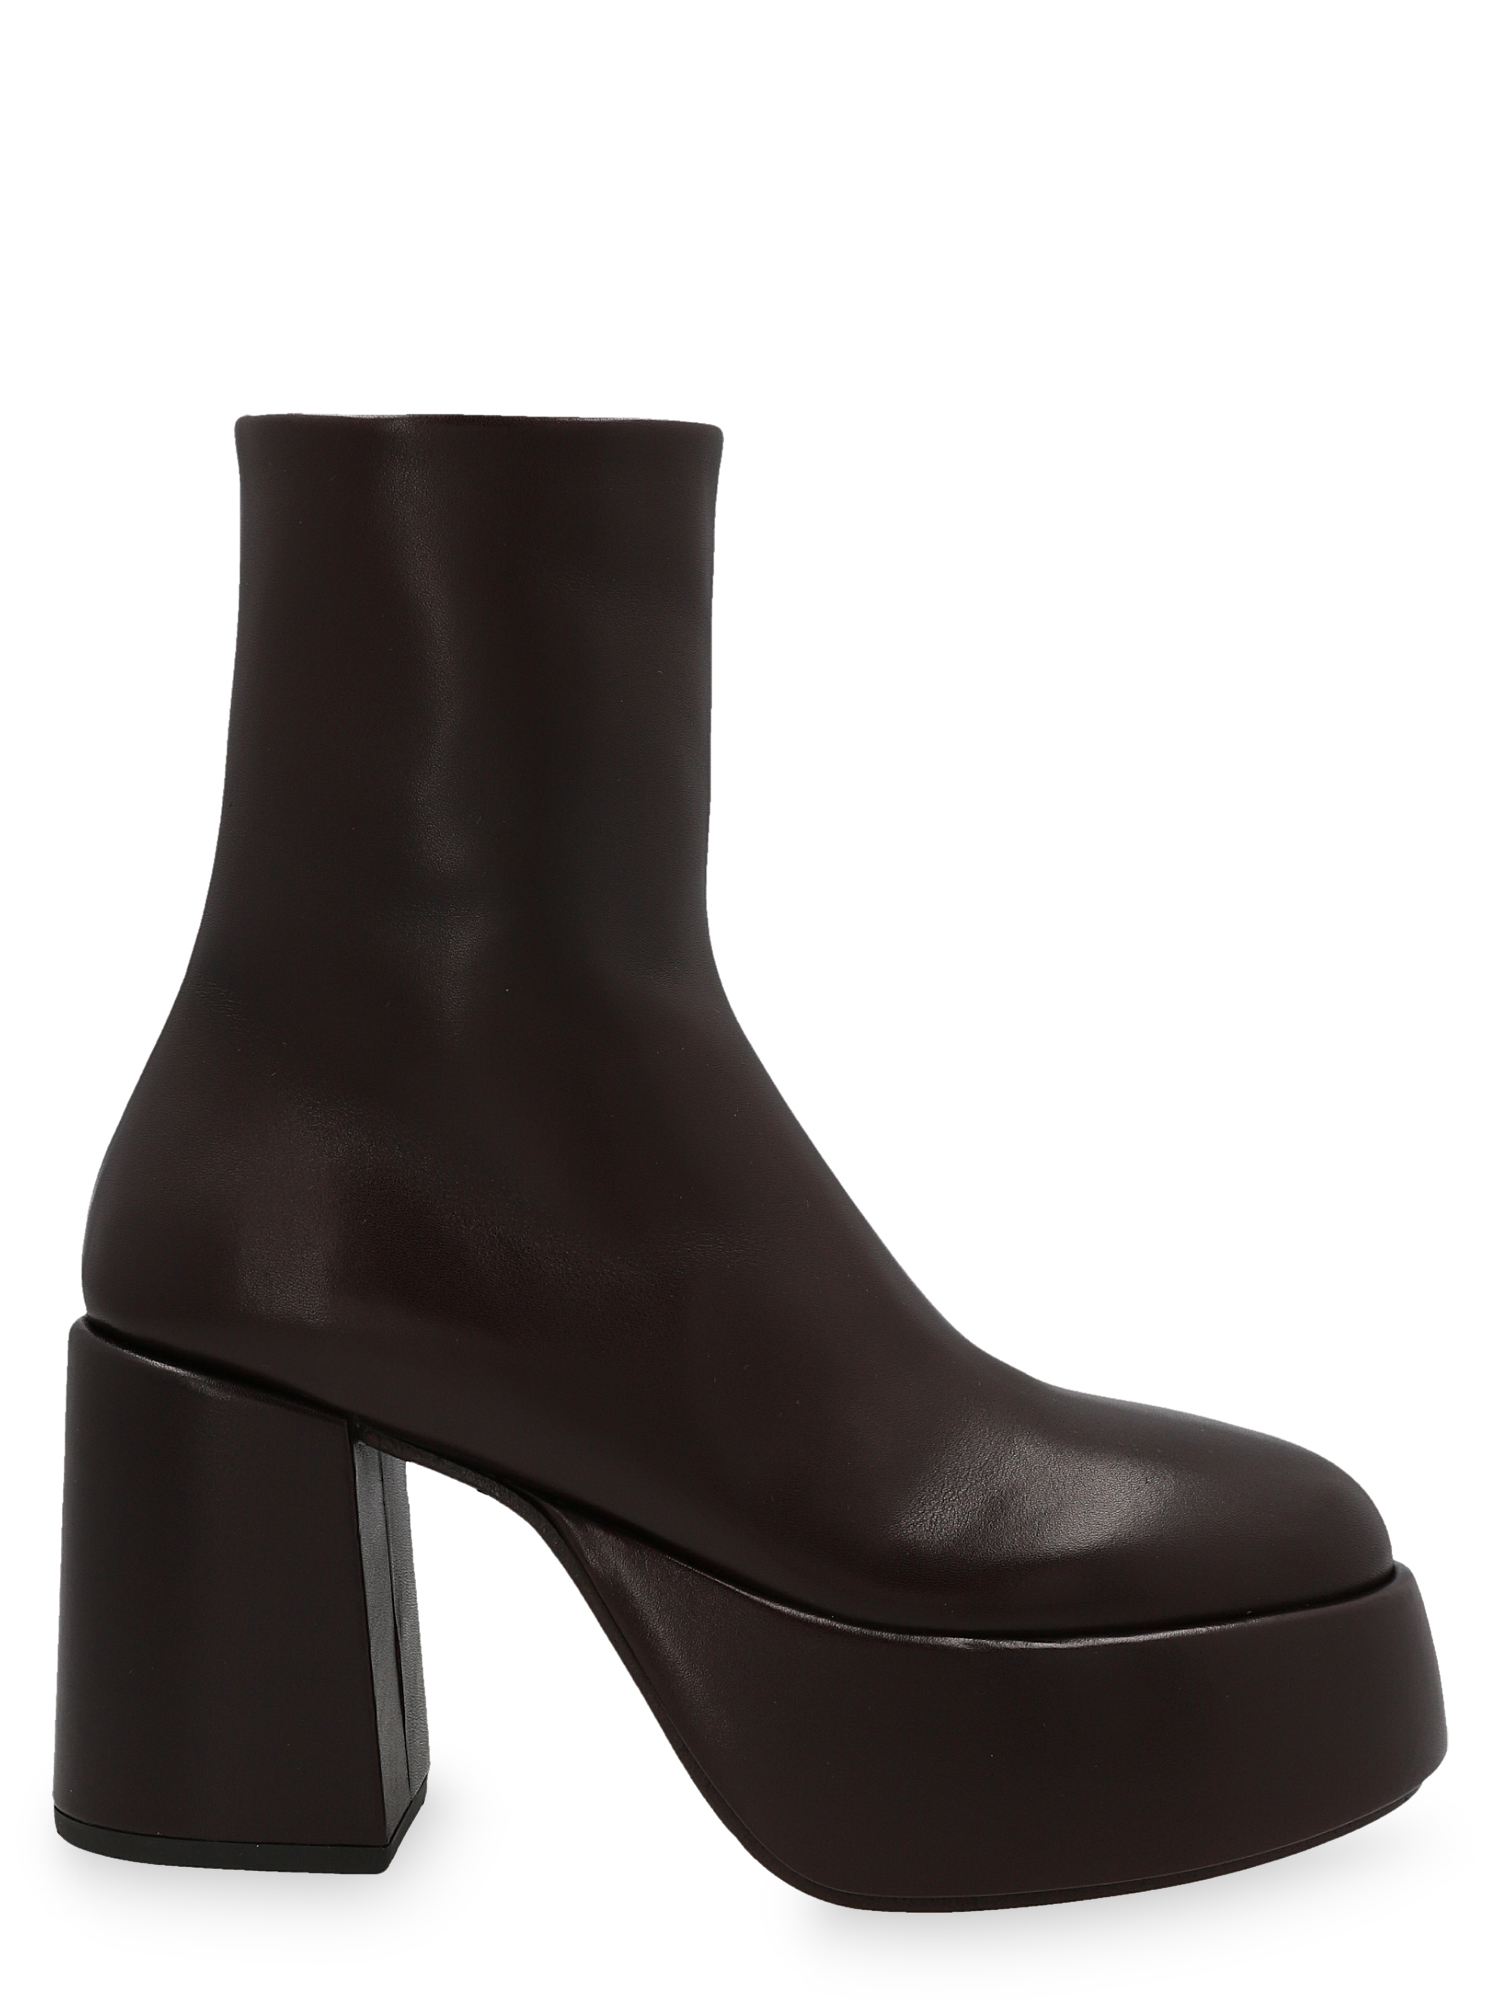 Bottines Pour Femme - Marsell - En Leather Brown - Taille: IT 35 - EU 35